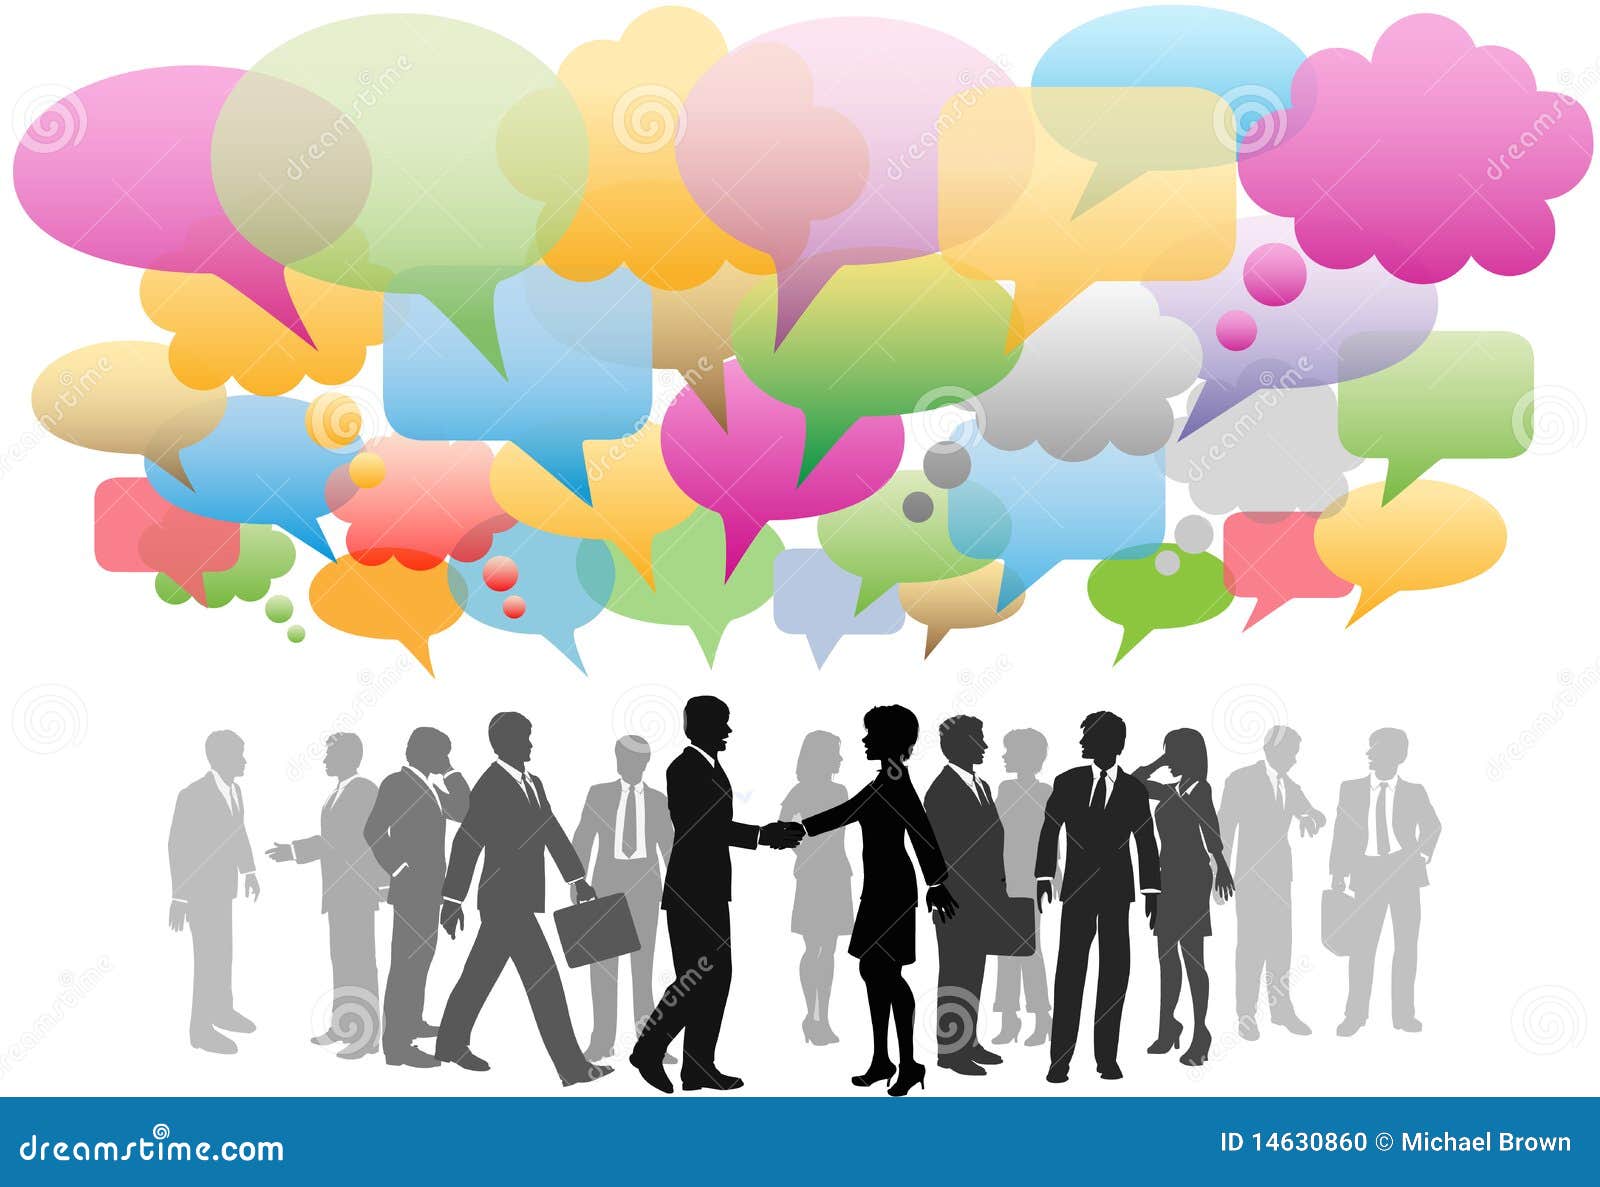 Free Persuasive Speech Example – Social networking sites